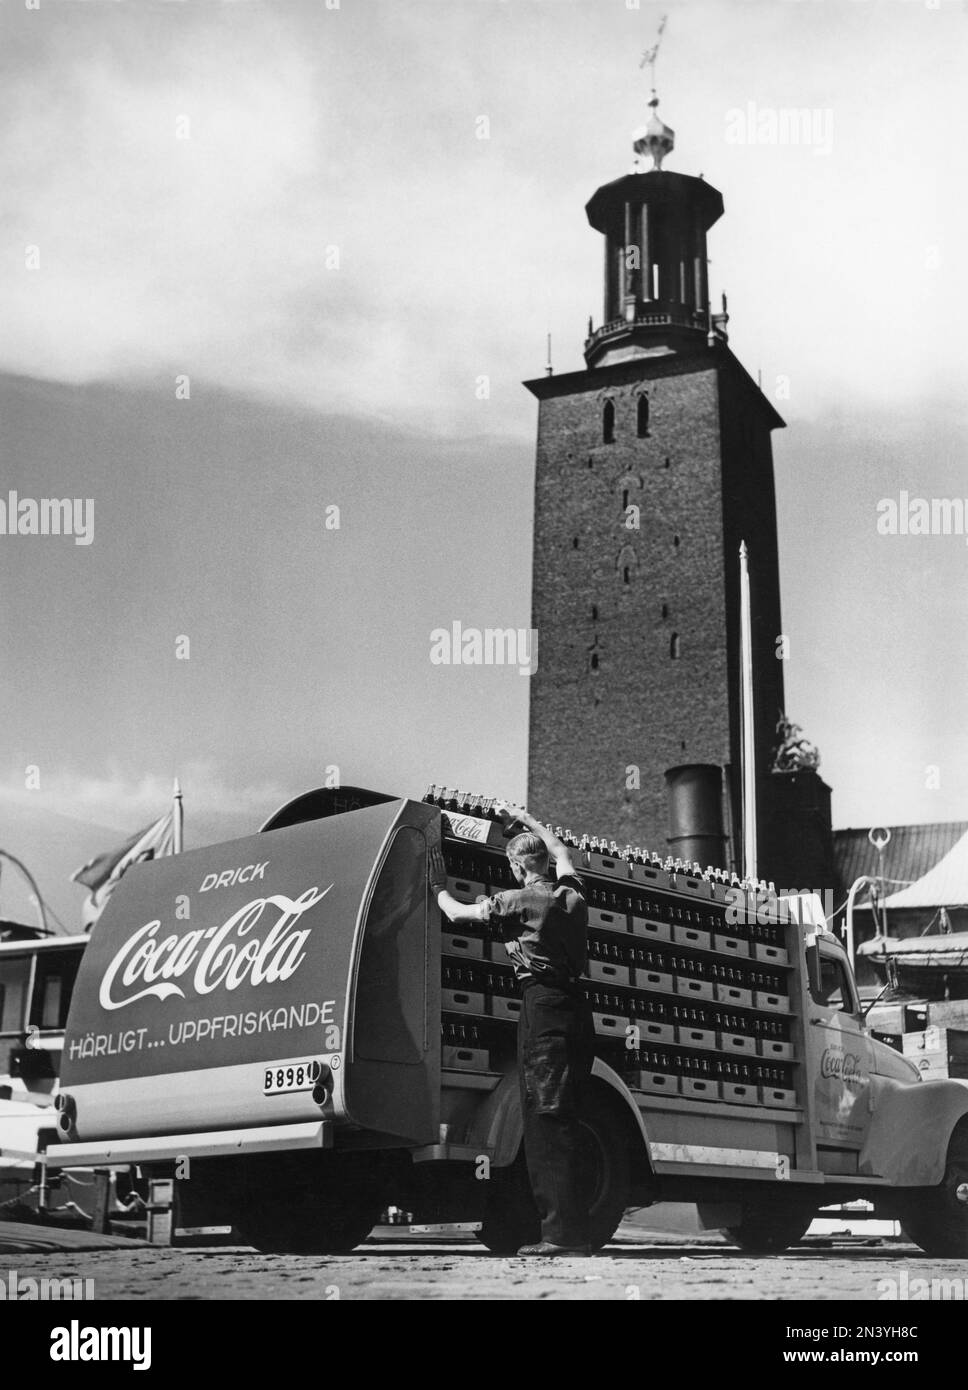 Coca cola in the 1950s. In 1 january 1953 Coca-Cola was first allowed to be manufactured and sold in Sweden, previously being restricted from sales in Sweden since the content of Coca-cola included forbidden substances like phosphoric acid and caffeine. One of the first  distribution trucks of the brewery Mineralvattenfabriken Tre Kronor loaded with Coca-Cola bottles pictured in Stockholm with the town hall in the background. Volvo trucks model L34 modifyed and painted in red for the exclusive use on Coca-Cola trucks. Coca-Cola was early with having advertising on their vehicles. Sweden 1953 Stock Photo